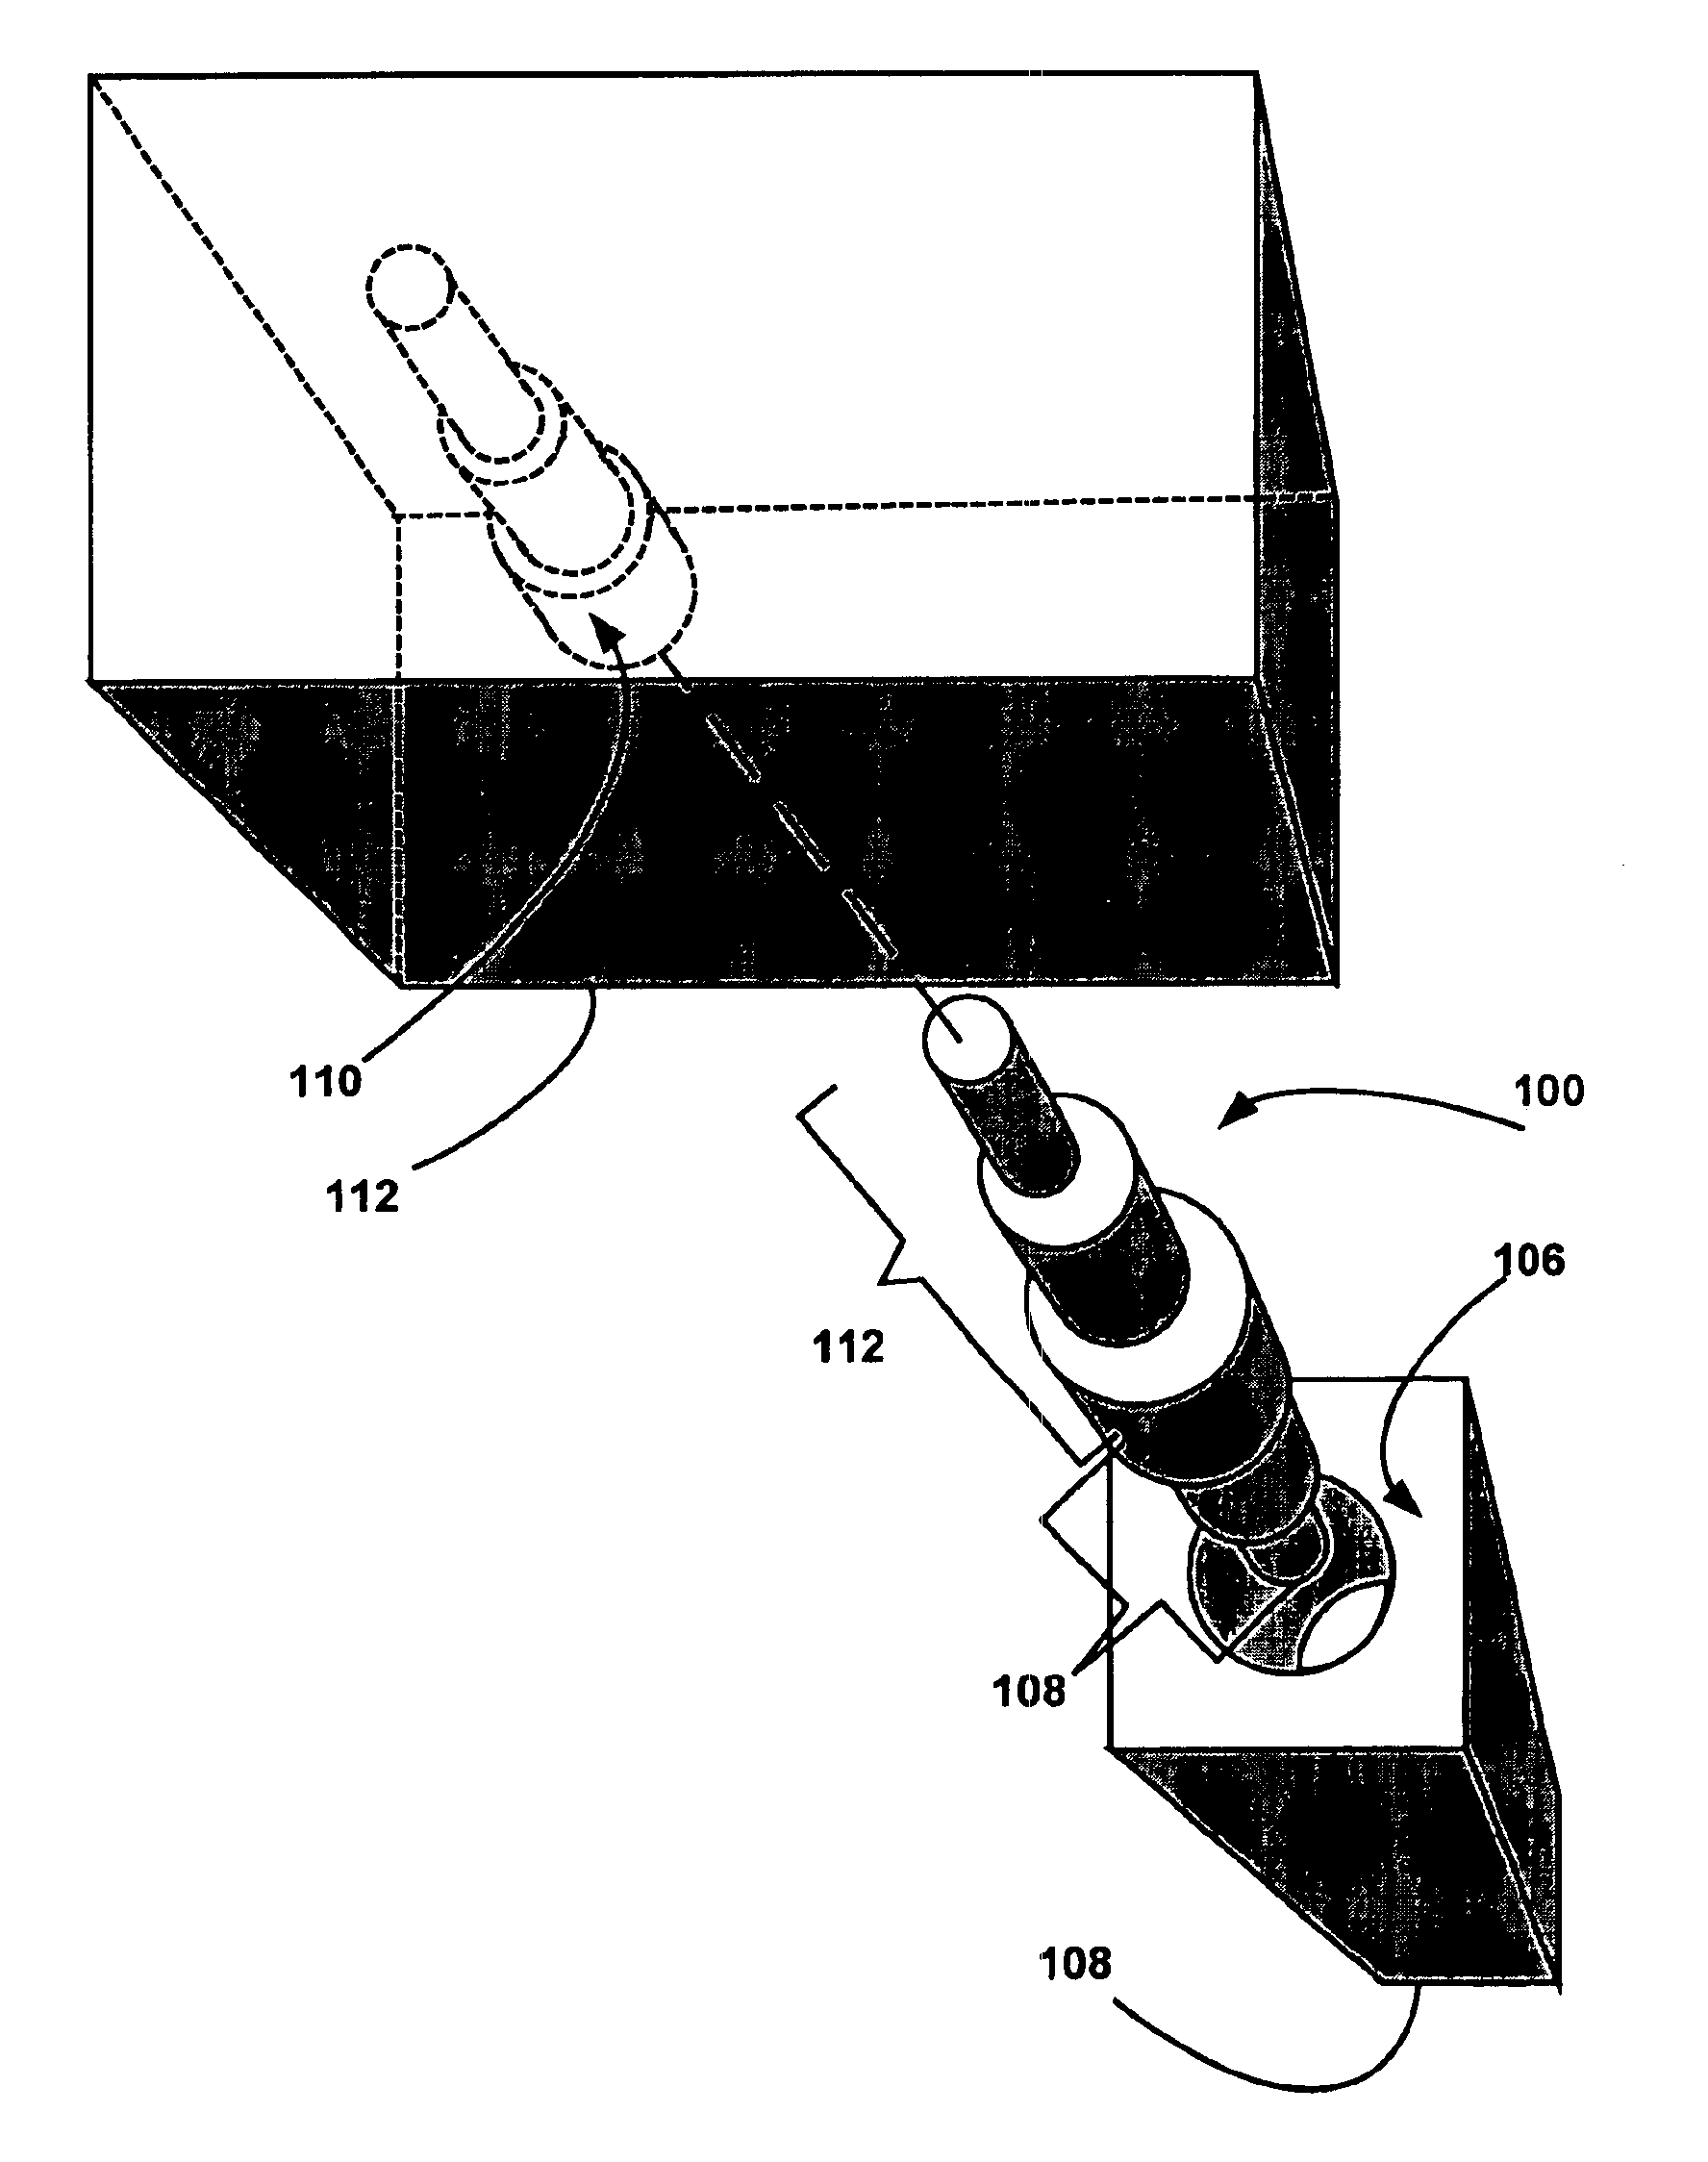 Dowel connection system and method